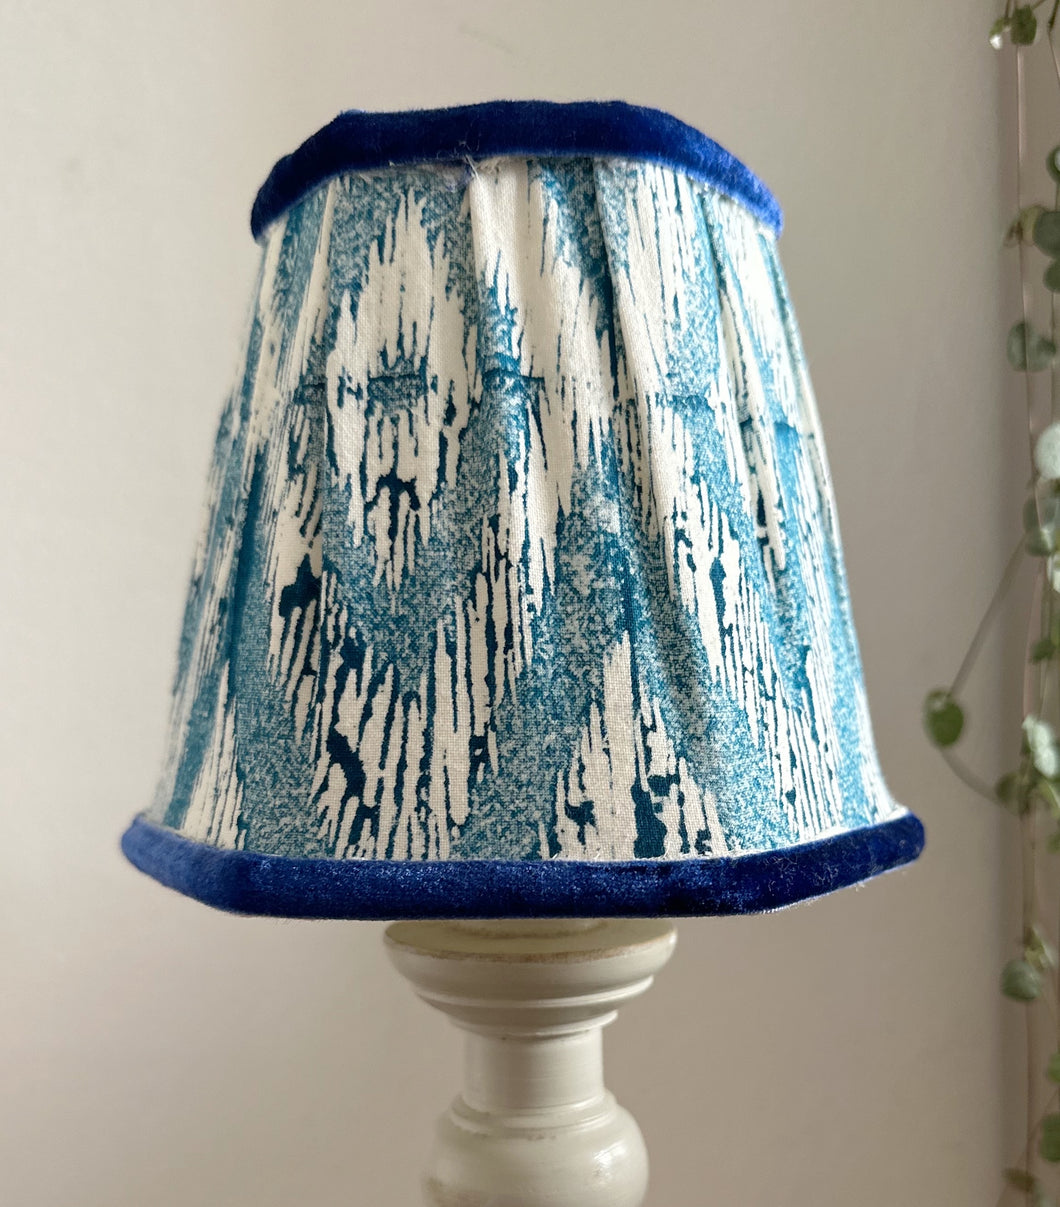 15cm Pleated Lampshade - Hand Printed Blue